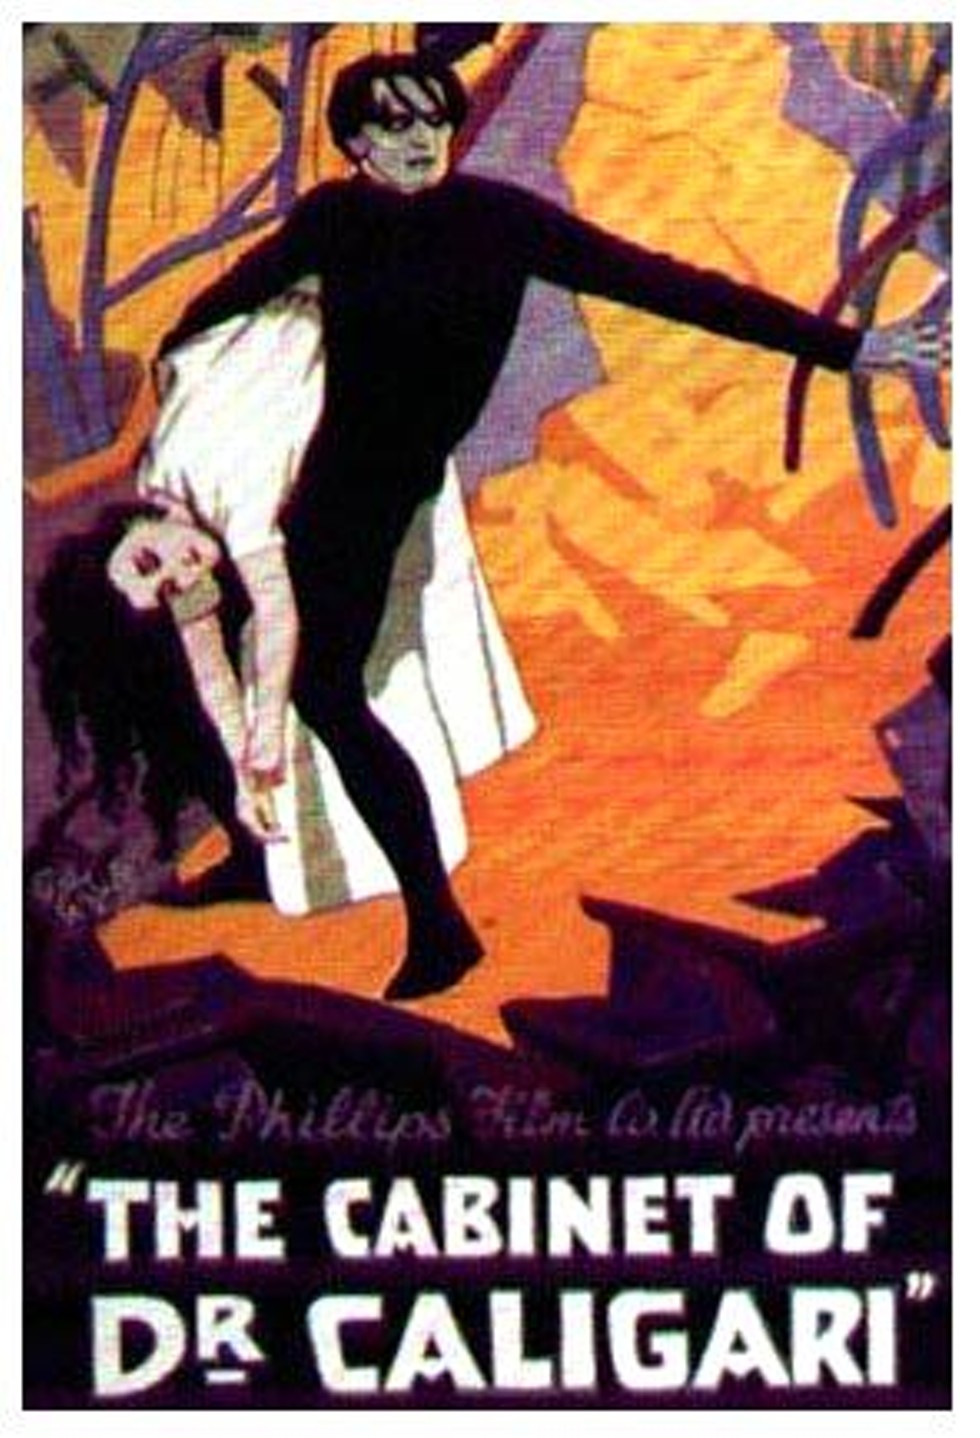 706ce4a5_the_cabinet_of_dr_caligari-311549286-large.jpg